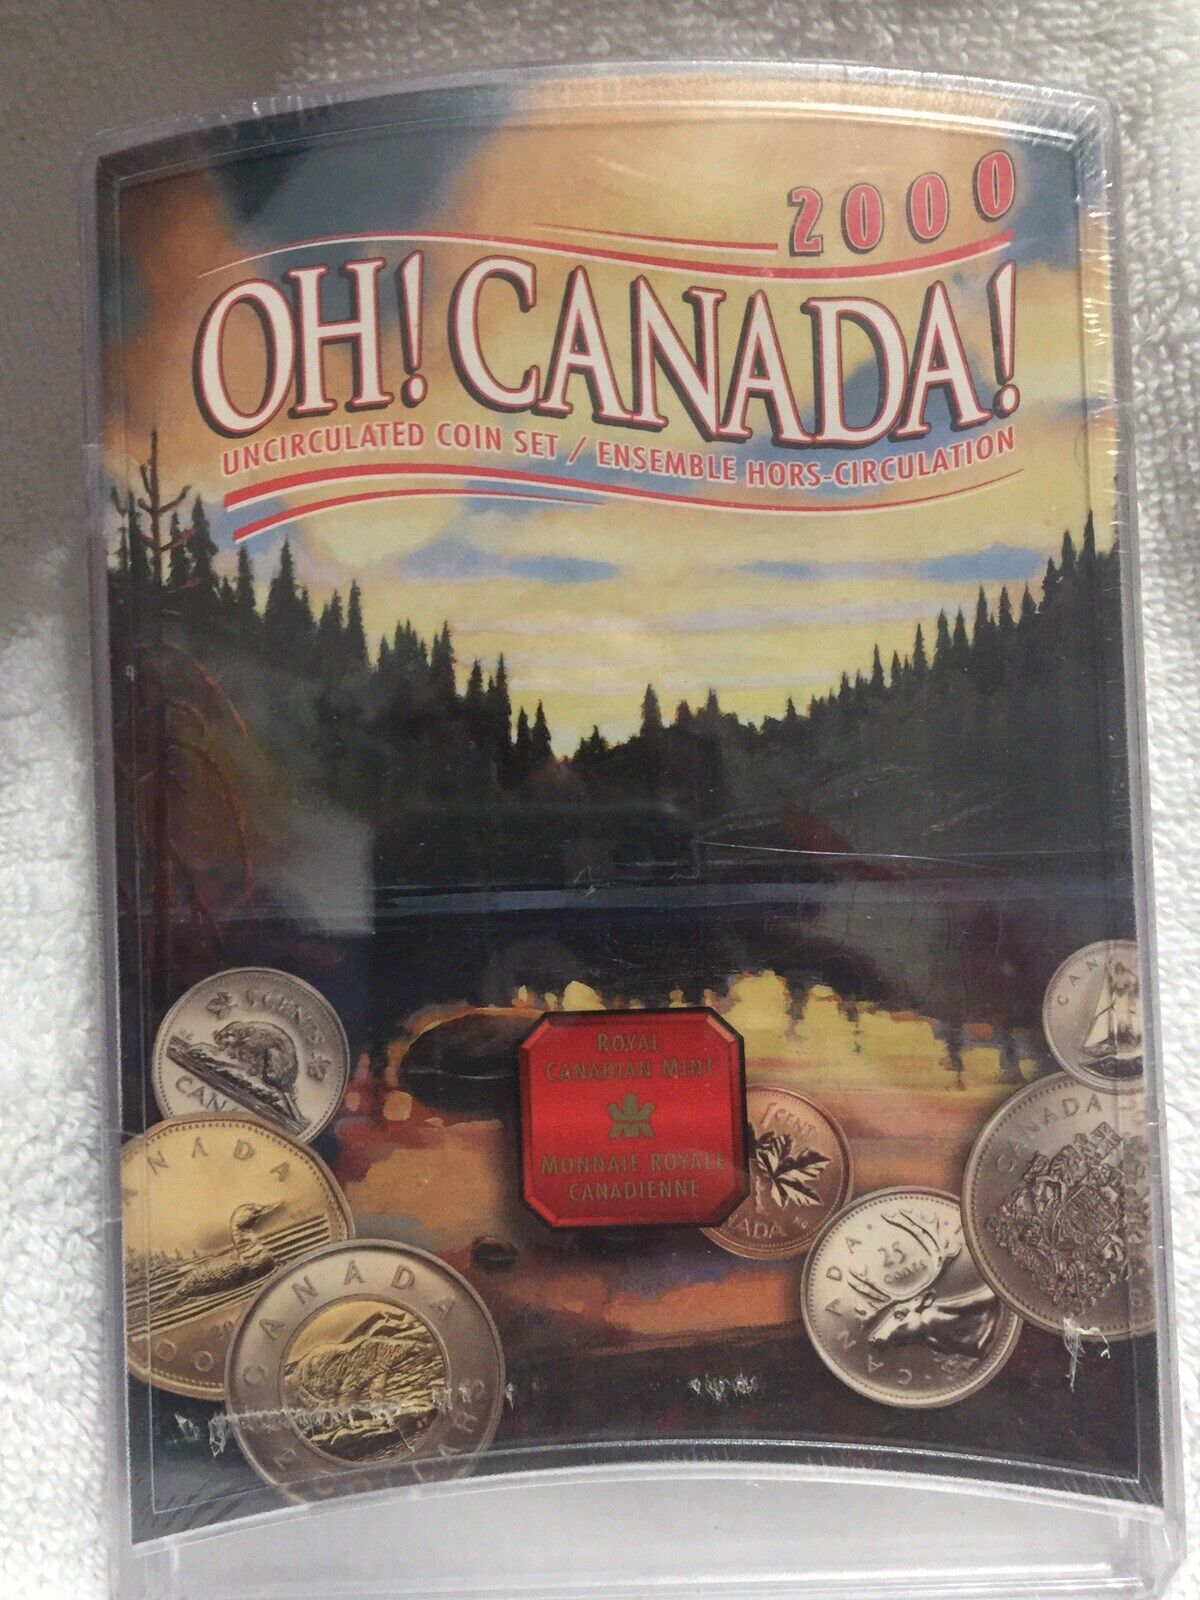 2000 OH! CANADA Uncirculated 7 Coin Set Images Of Canada Royal Canadian Mint